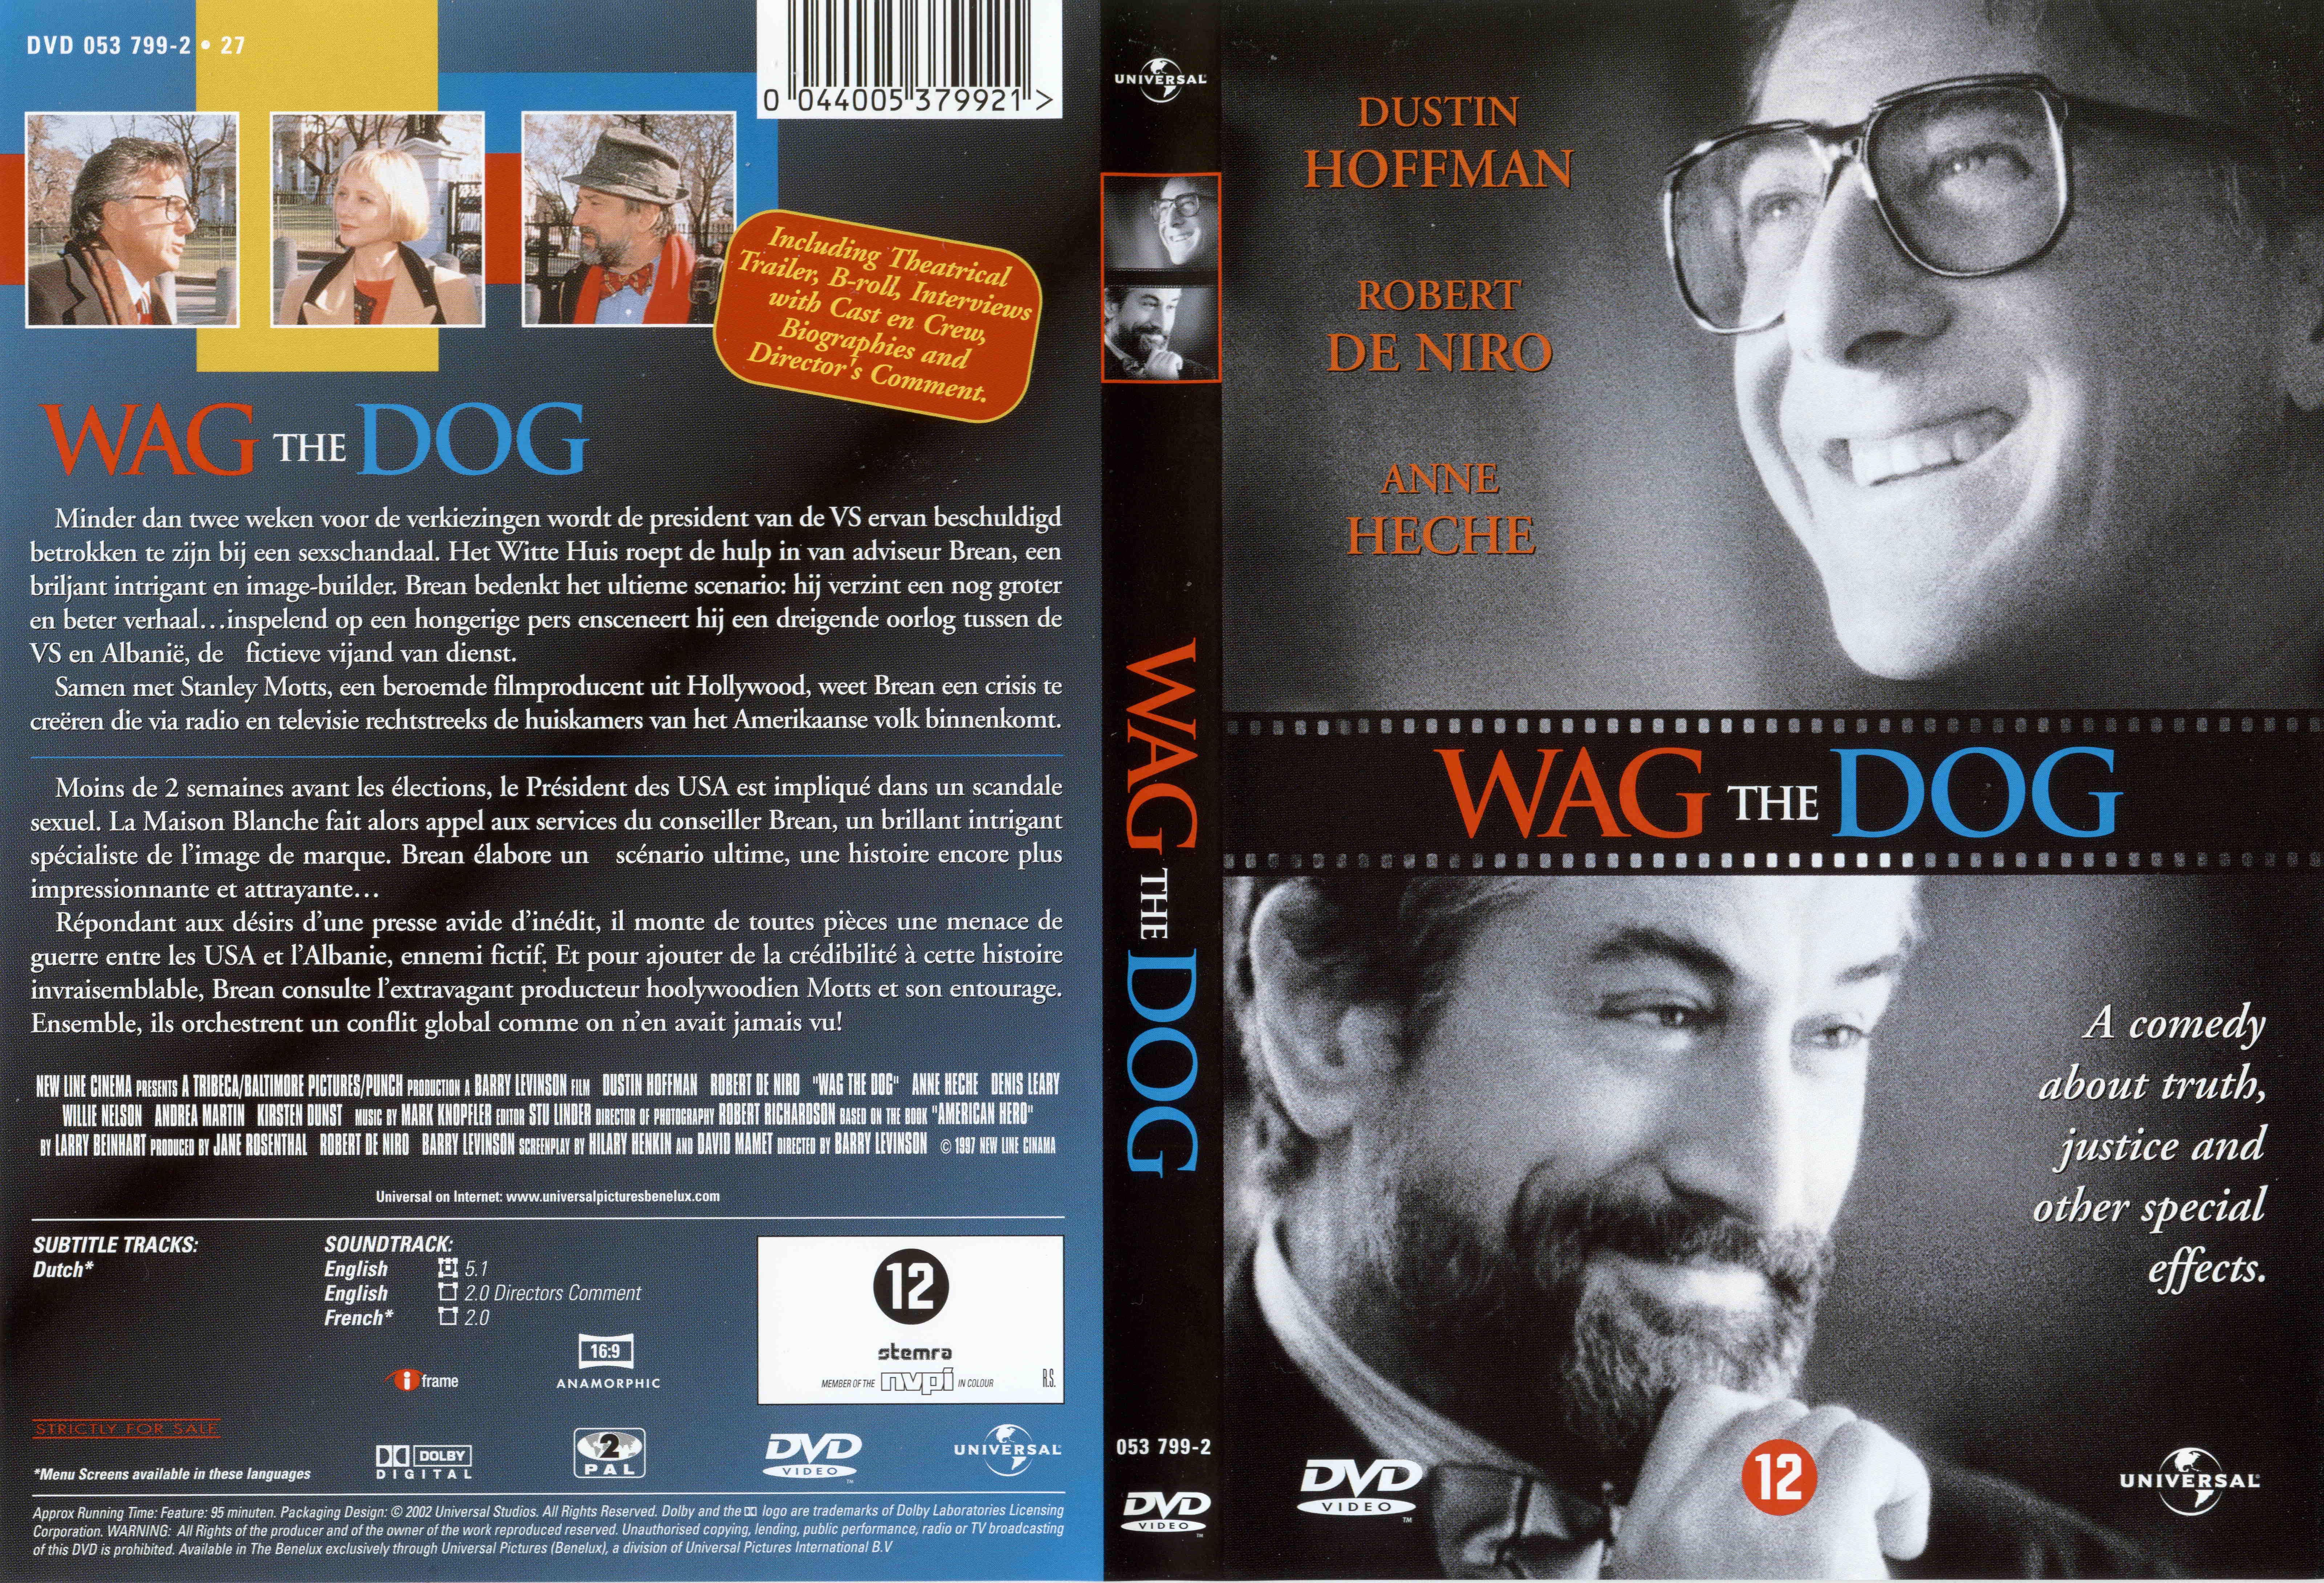 Jaquette DVD Wag the dog v2